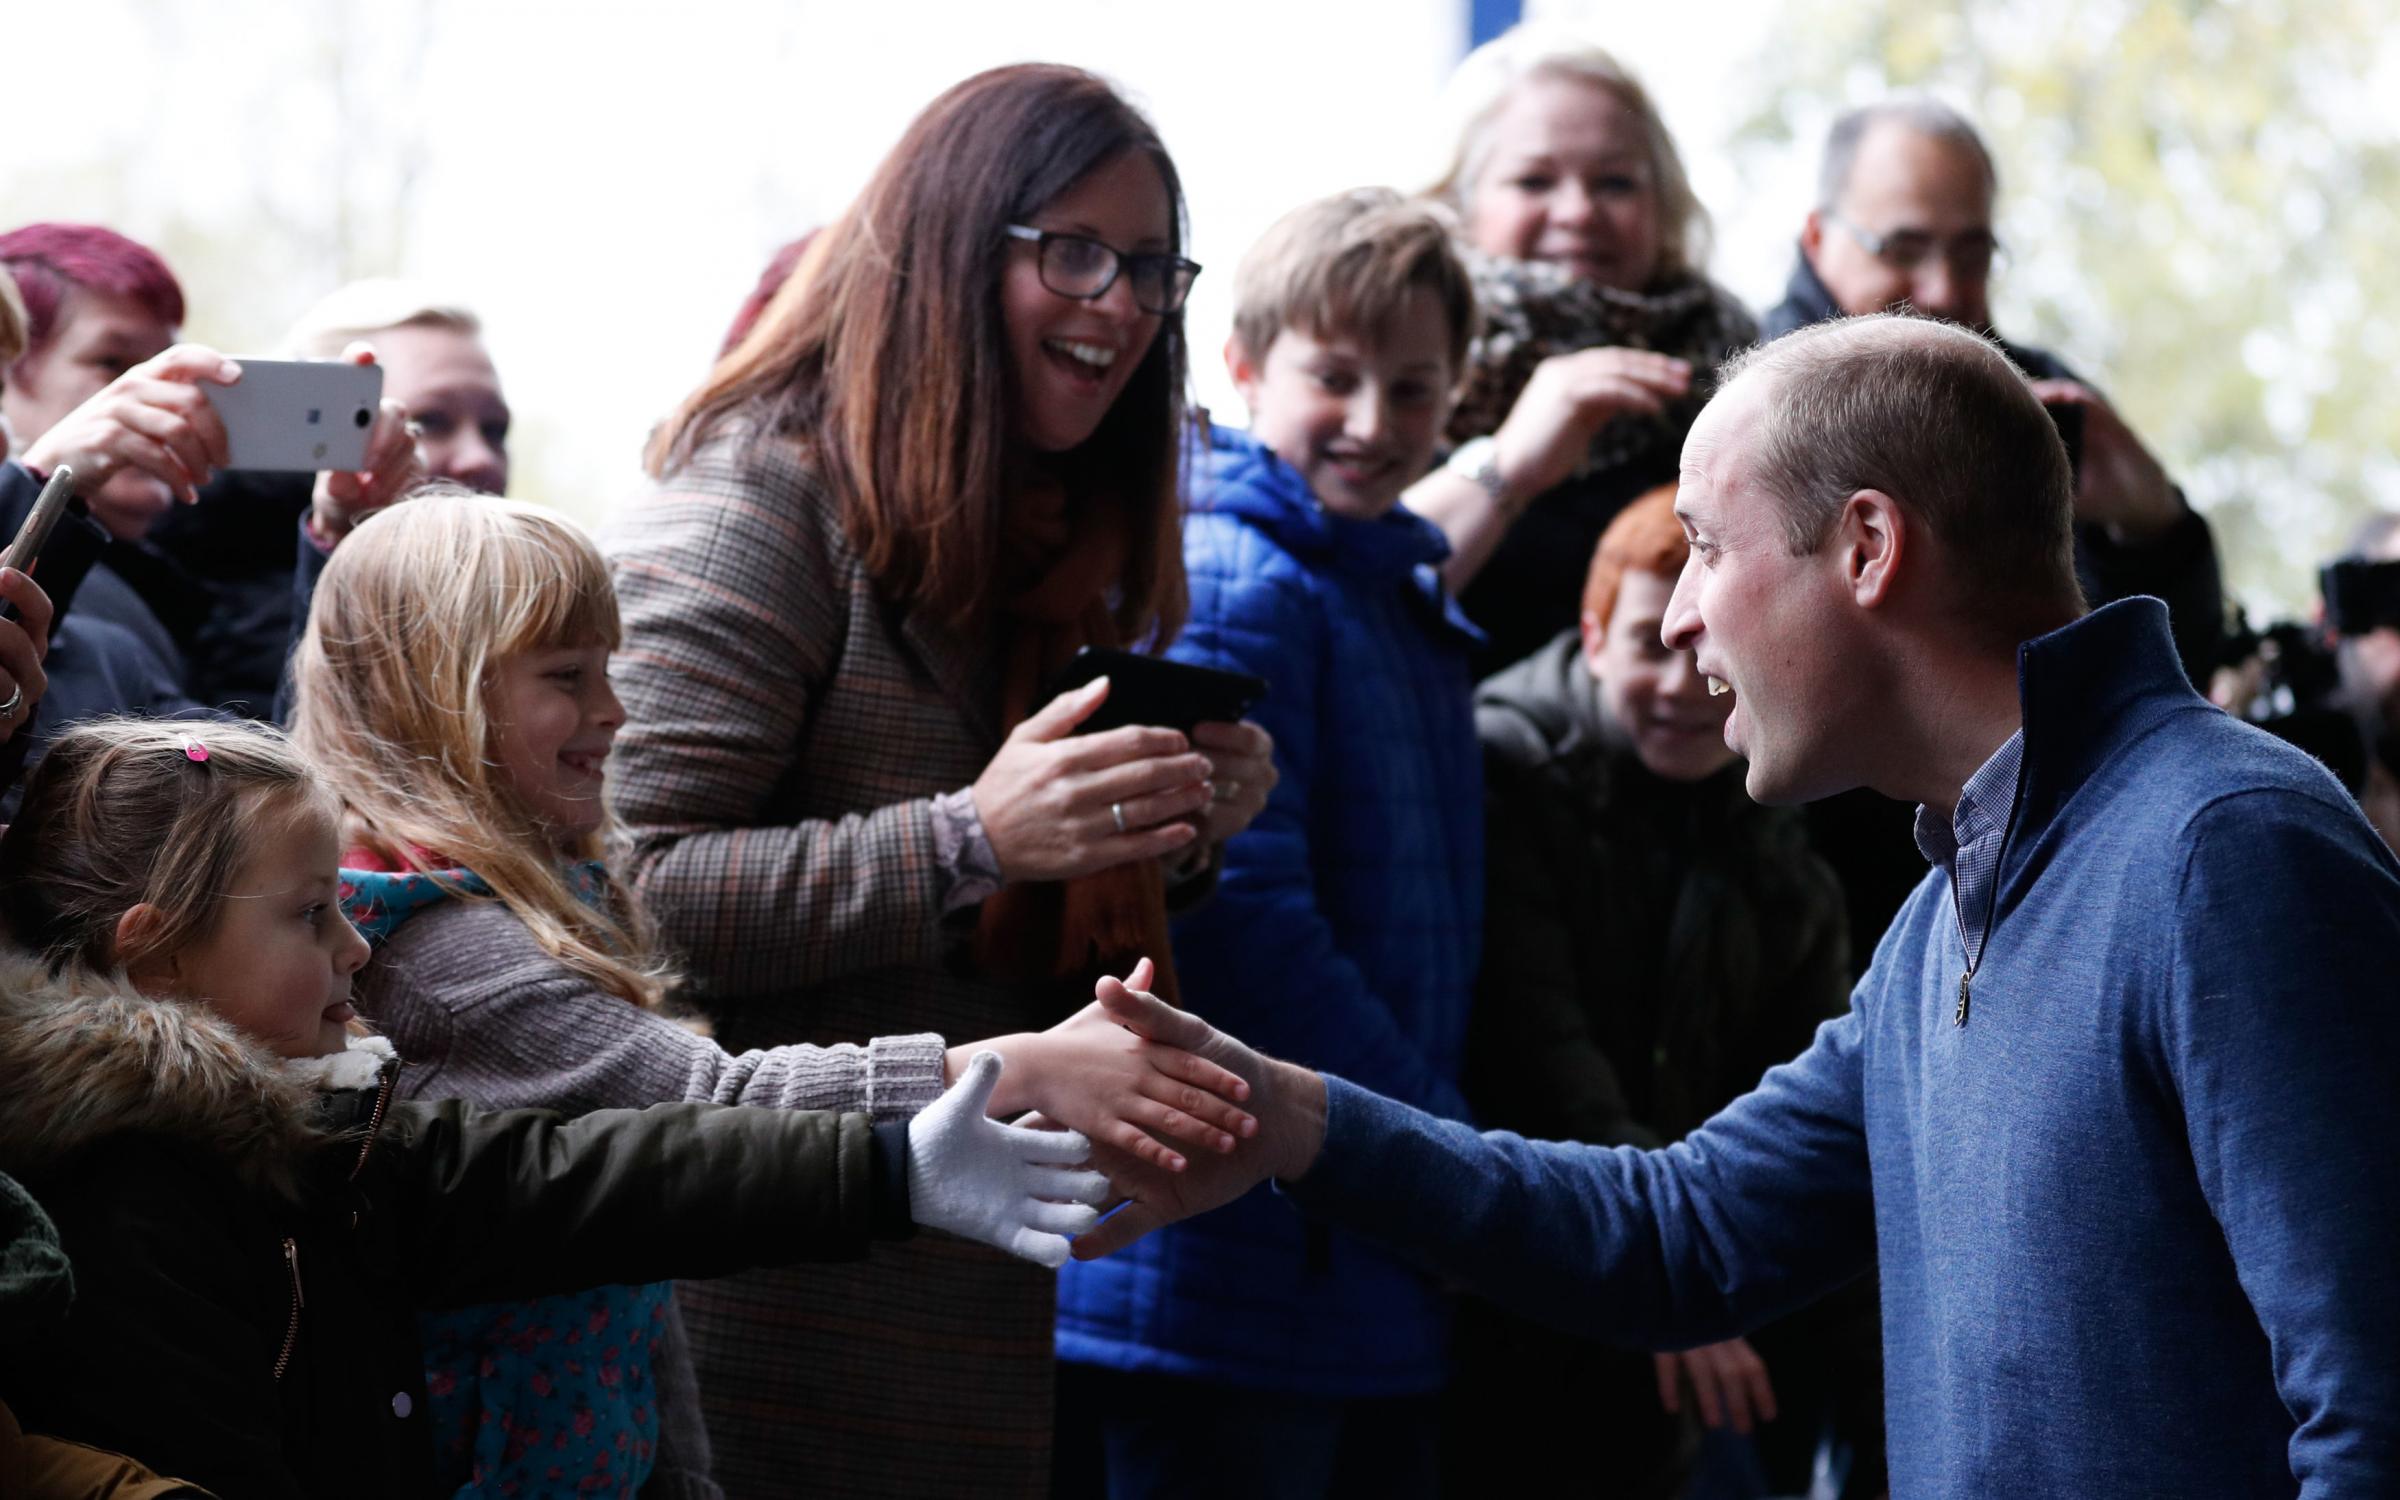 Friendly faces - Prince William, the Duke of Cambridge, says hello to two excitable youngsters when he paid a visit to Basildon Sporting Village in 2018